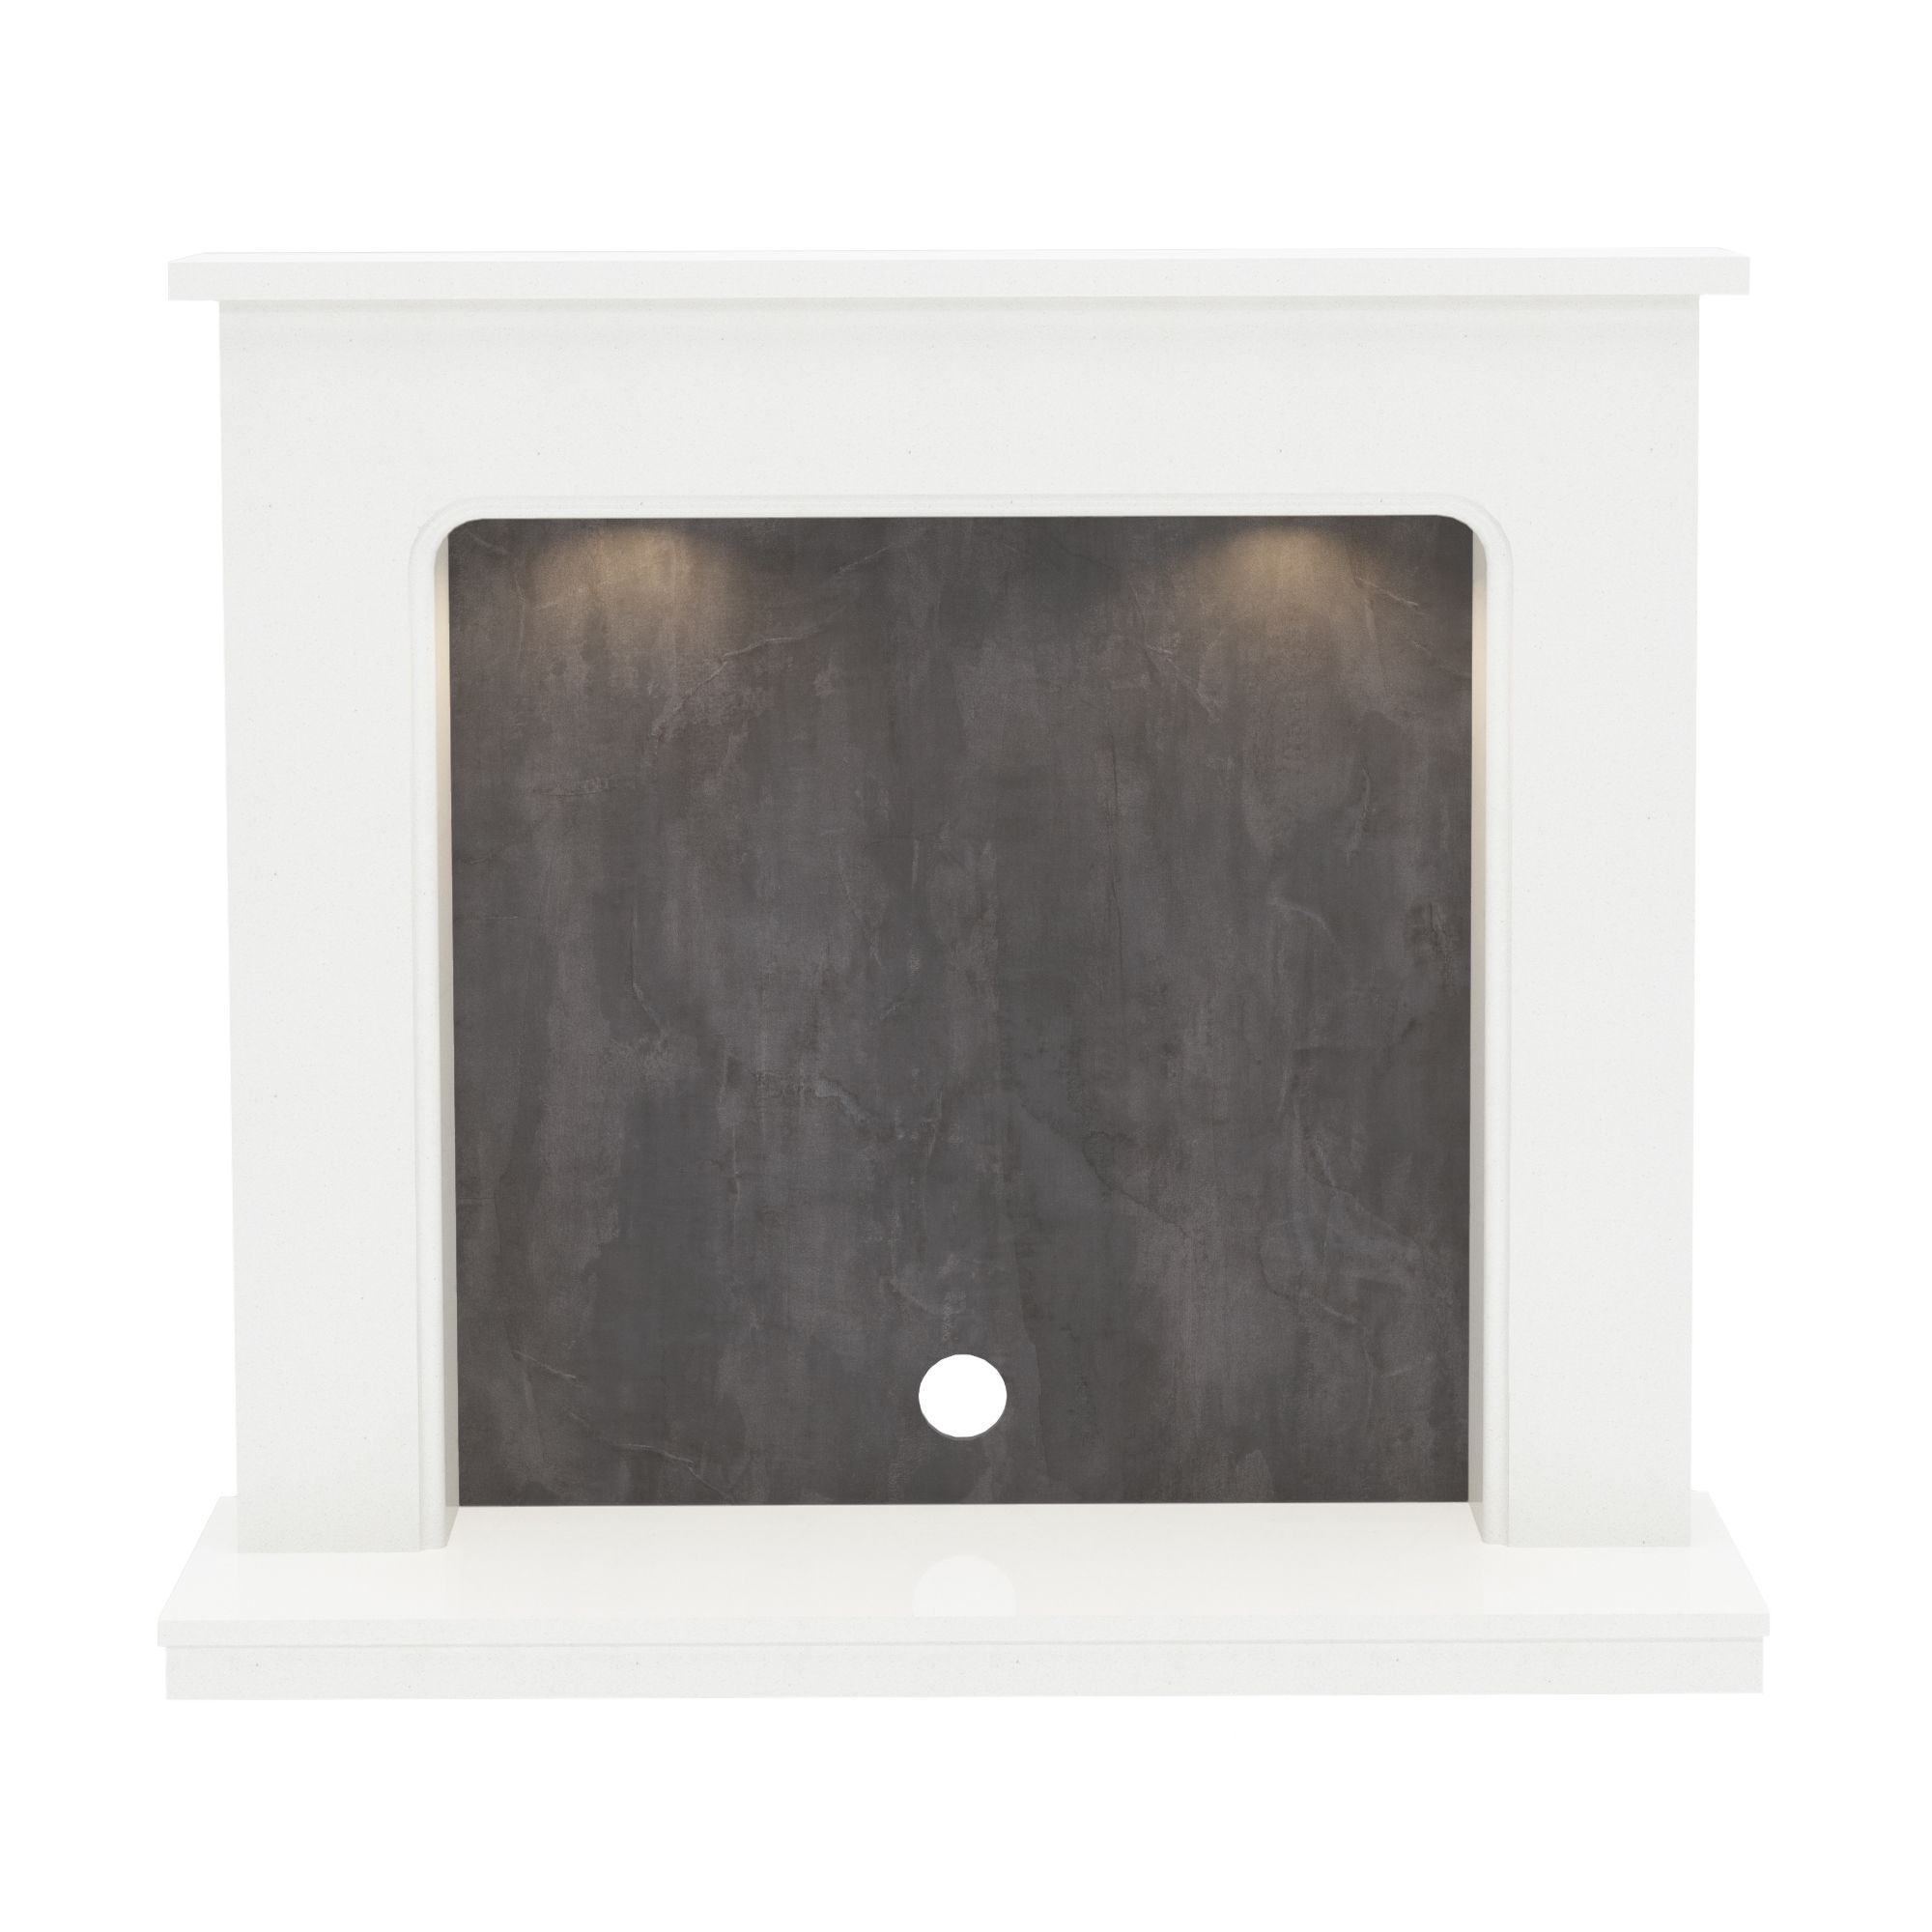 Be Modern Fontwell White marble & Slate effect Fire surround set with Lights included